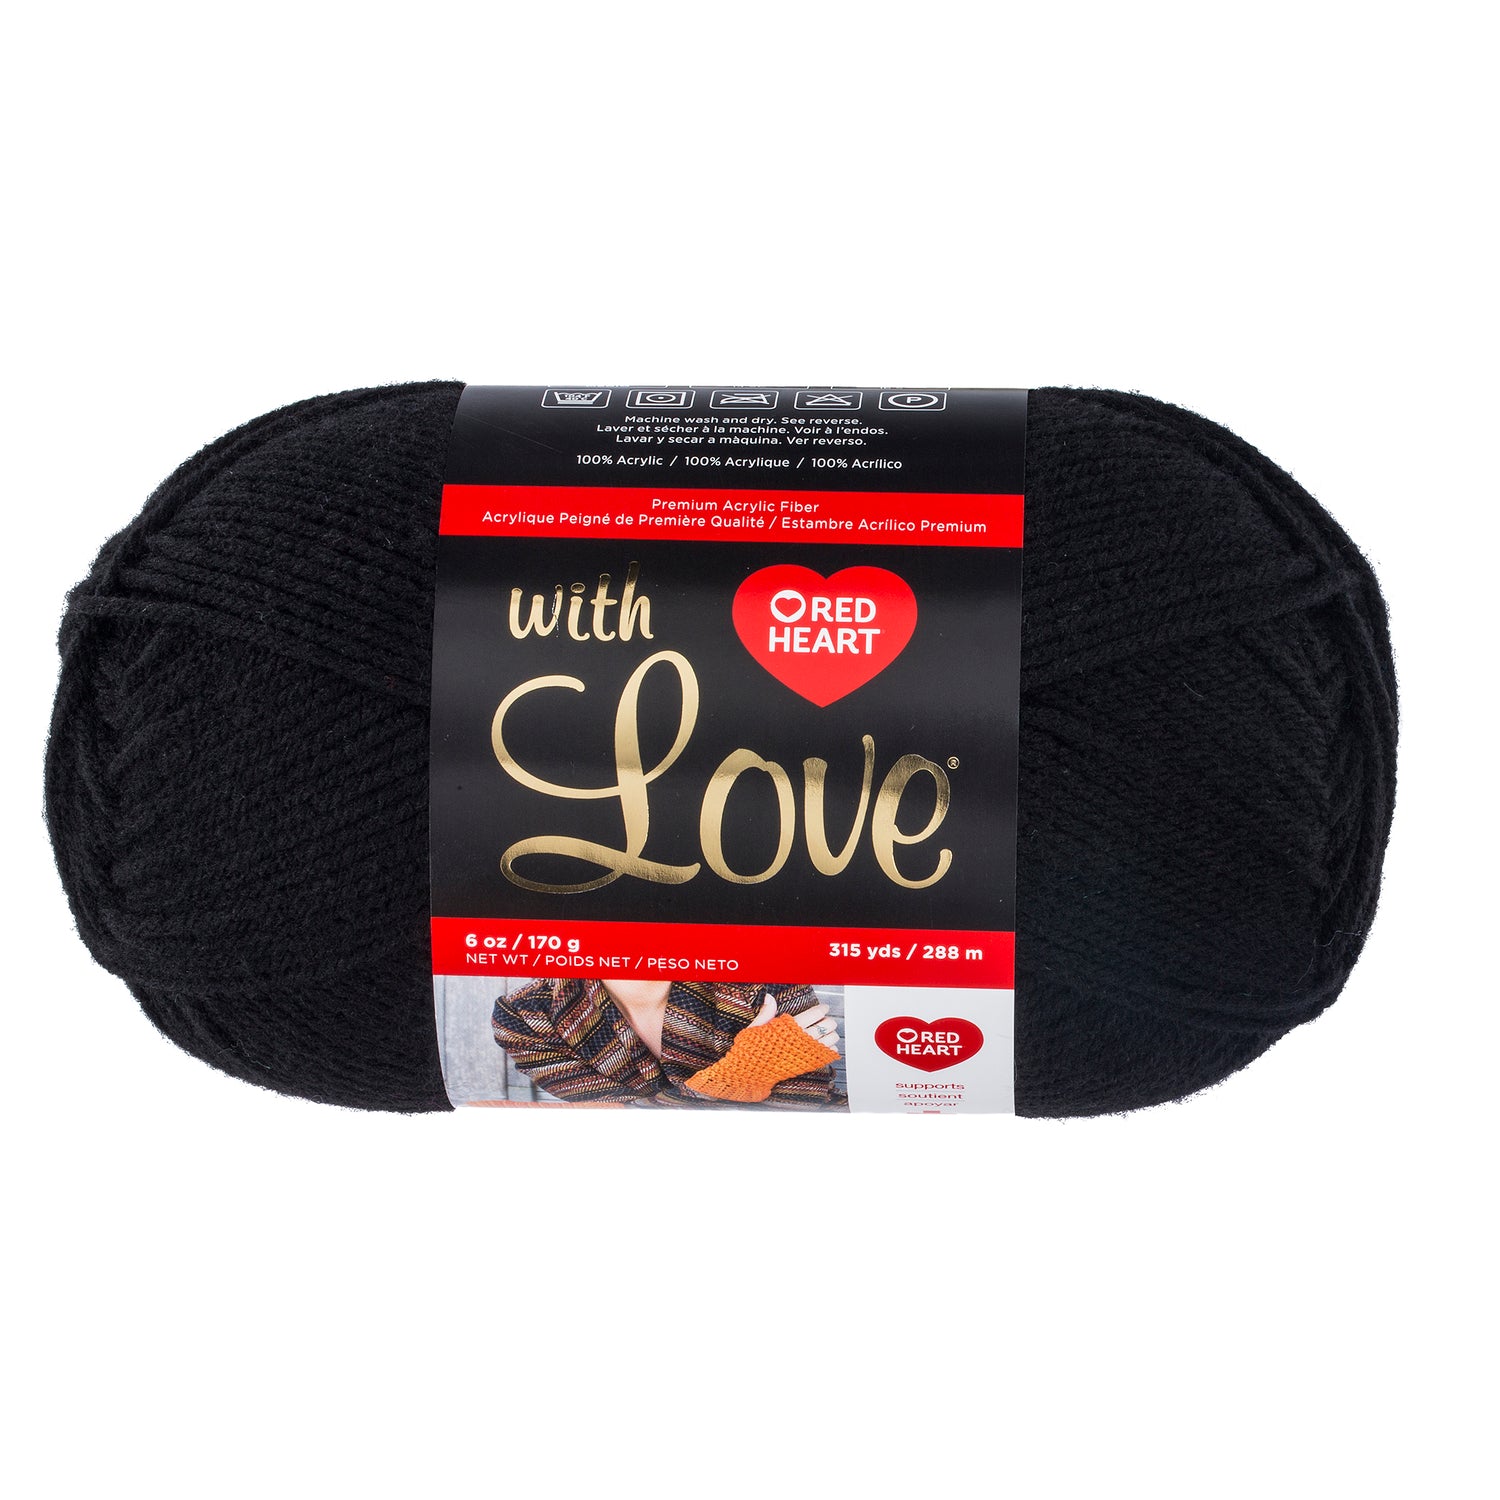 Red Heart With Love Yarn (170g/4.5oz) - Discontinued Shades